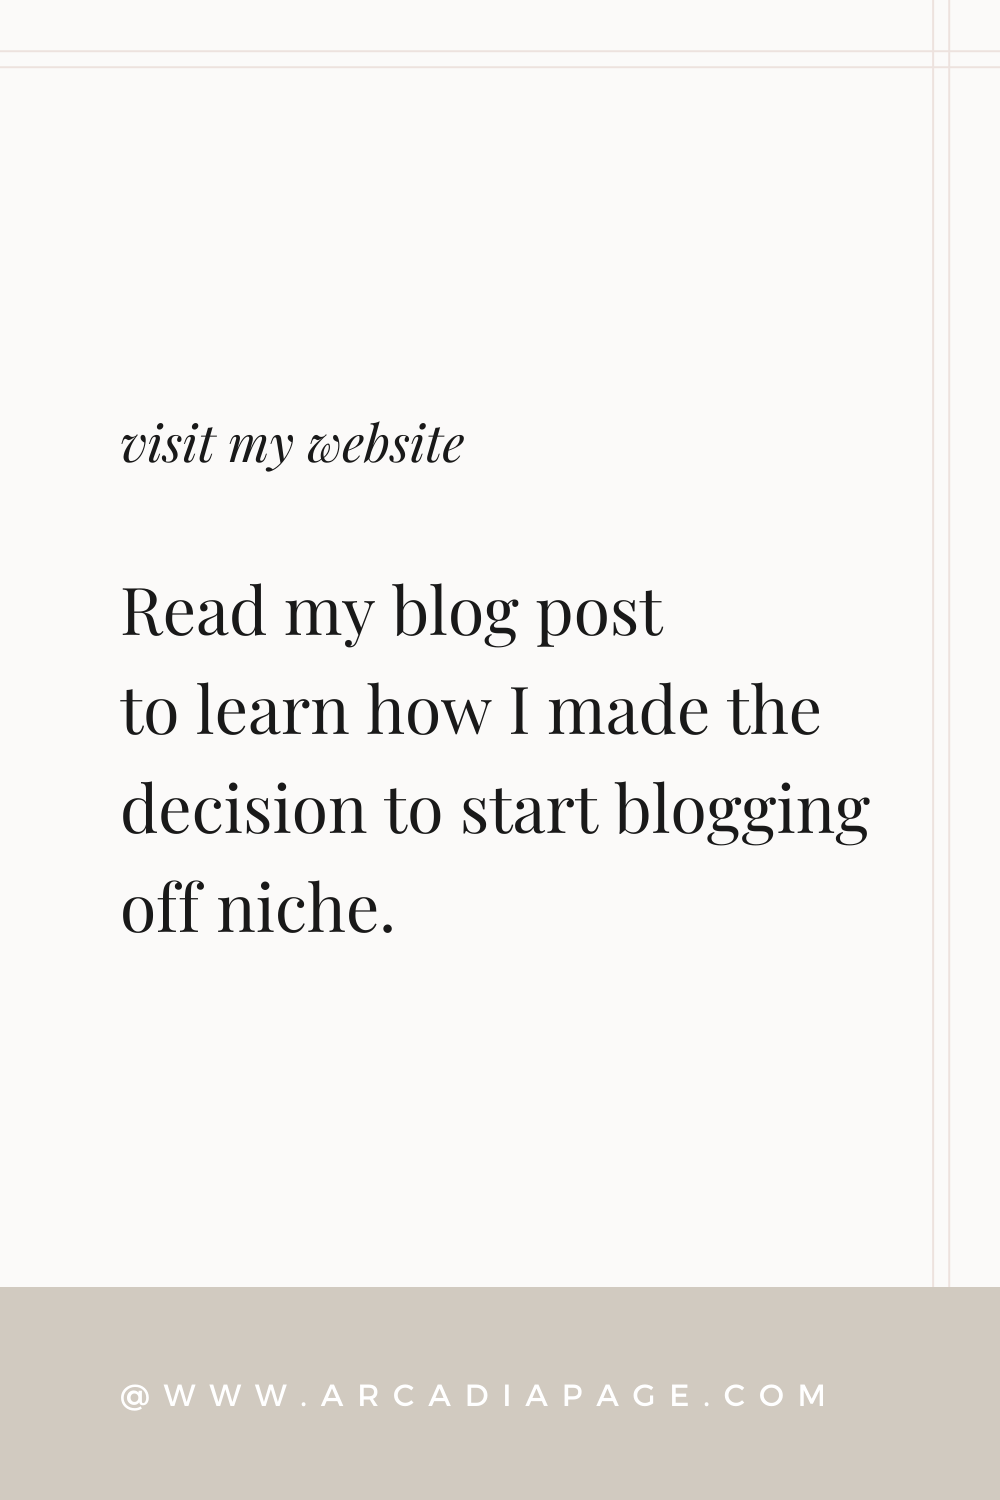 Why I Decided to Blog Off Niche